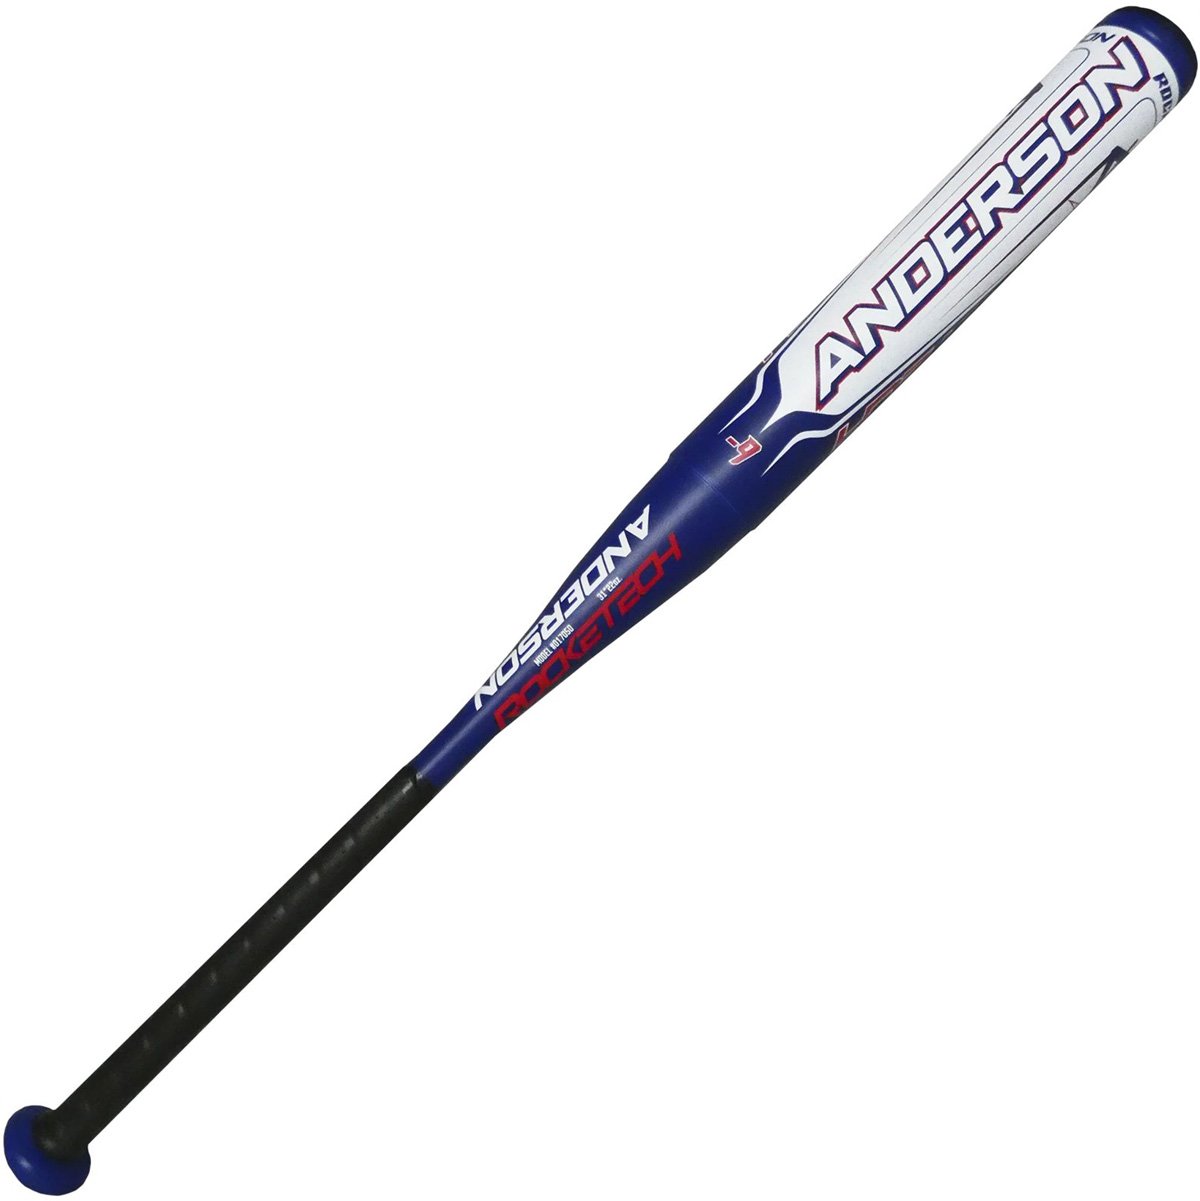 anderson-rocketech-2022-fastpitch-9-softball-bat-32-inch-23-oz 017050-3223 Anderson 854378000649 <p>The Anderson Rocketech has spent almost two decades dominating the fastpitch